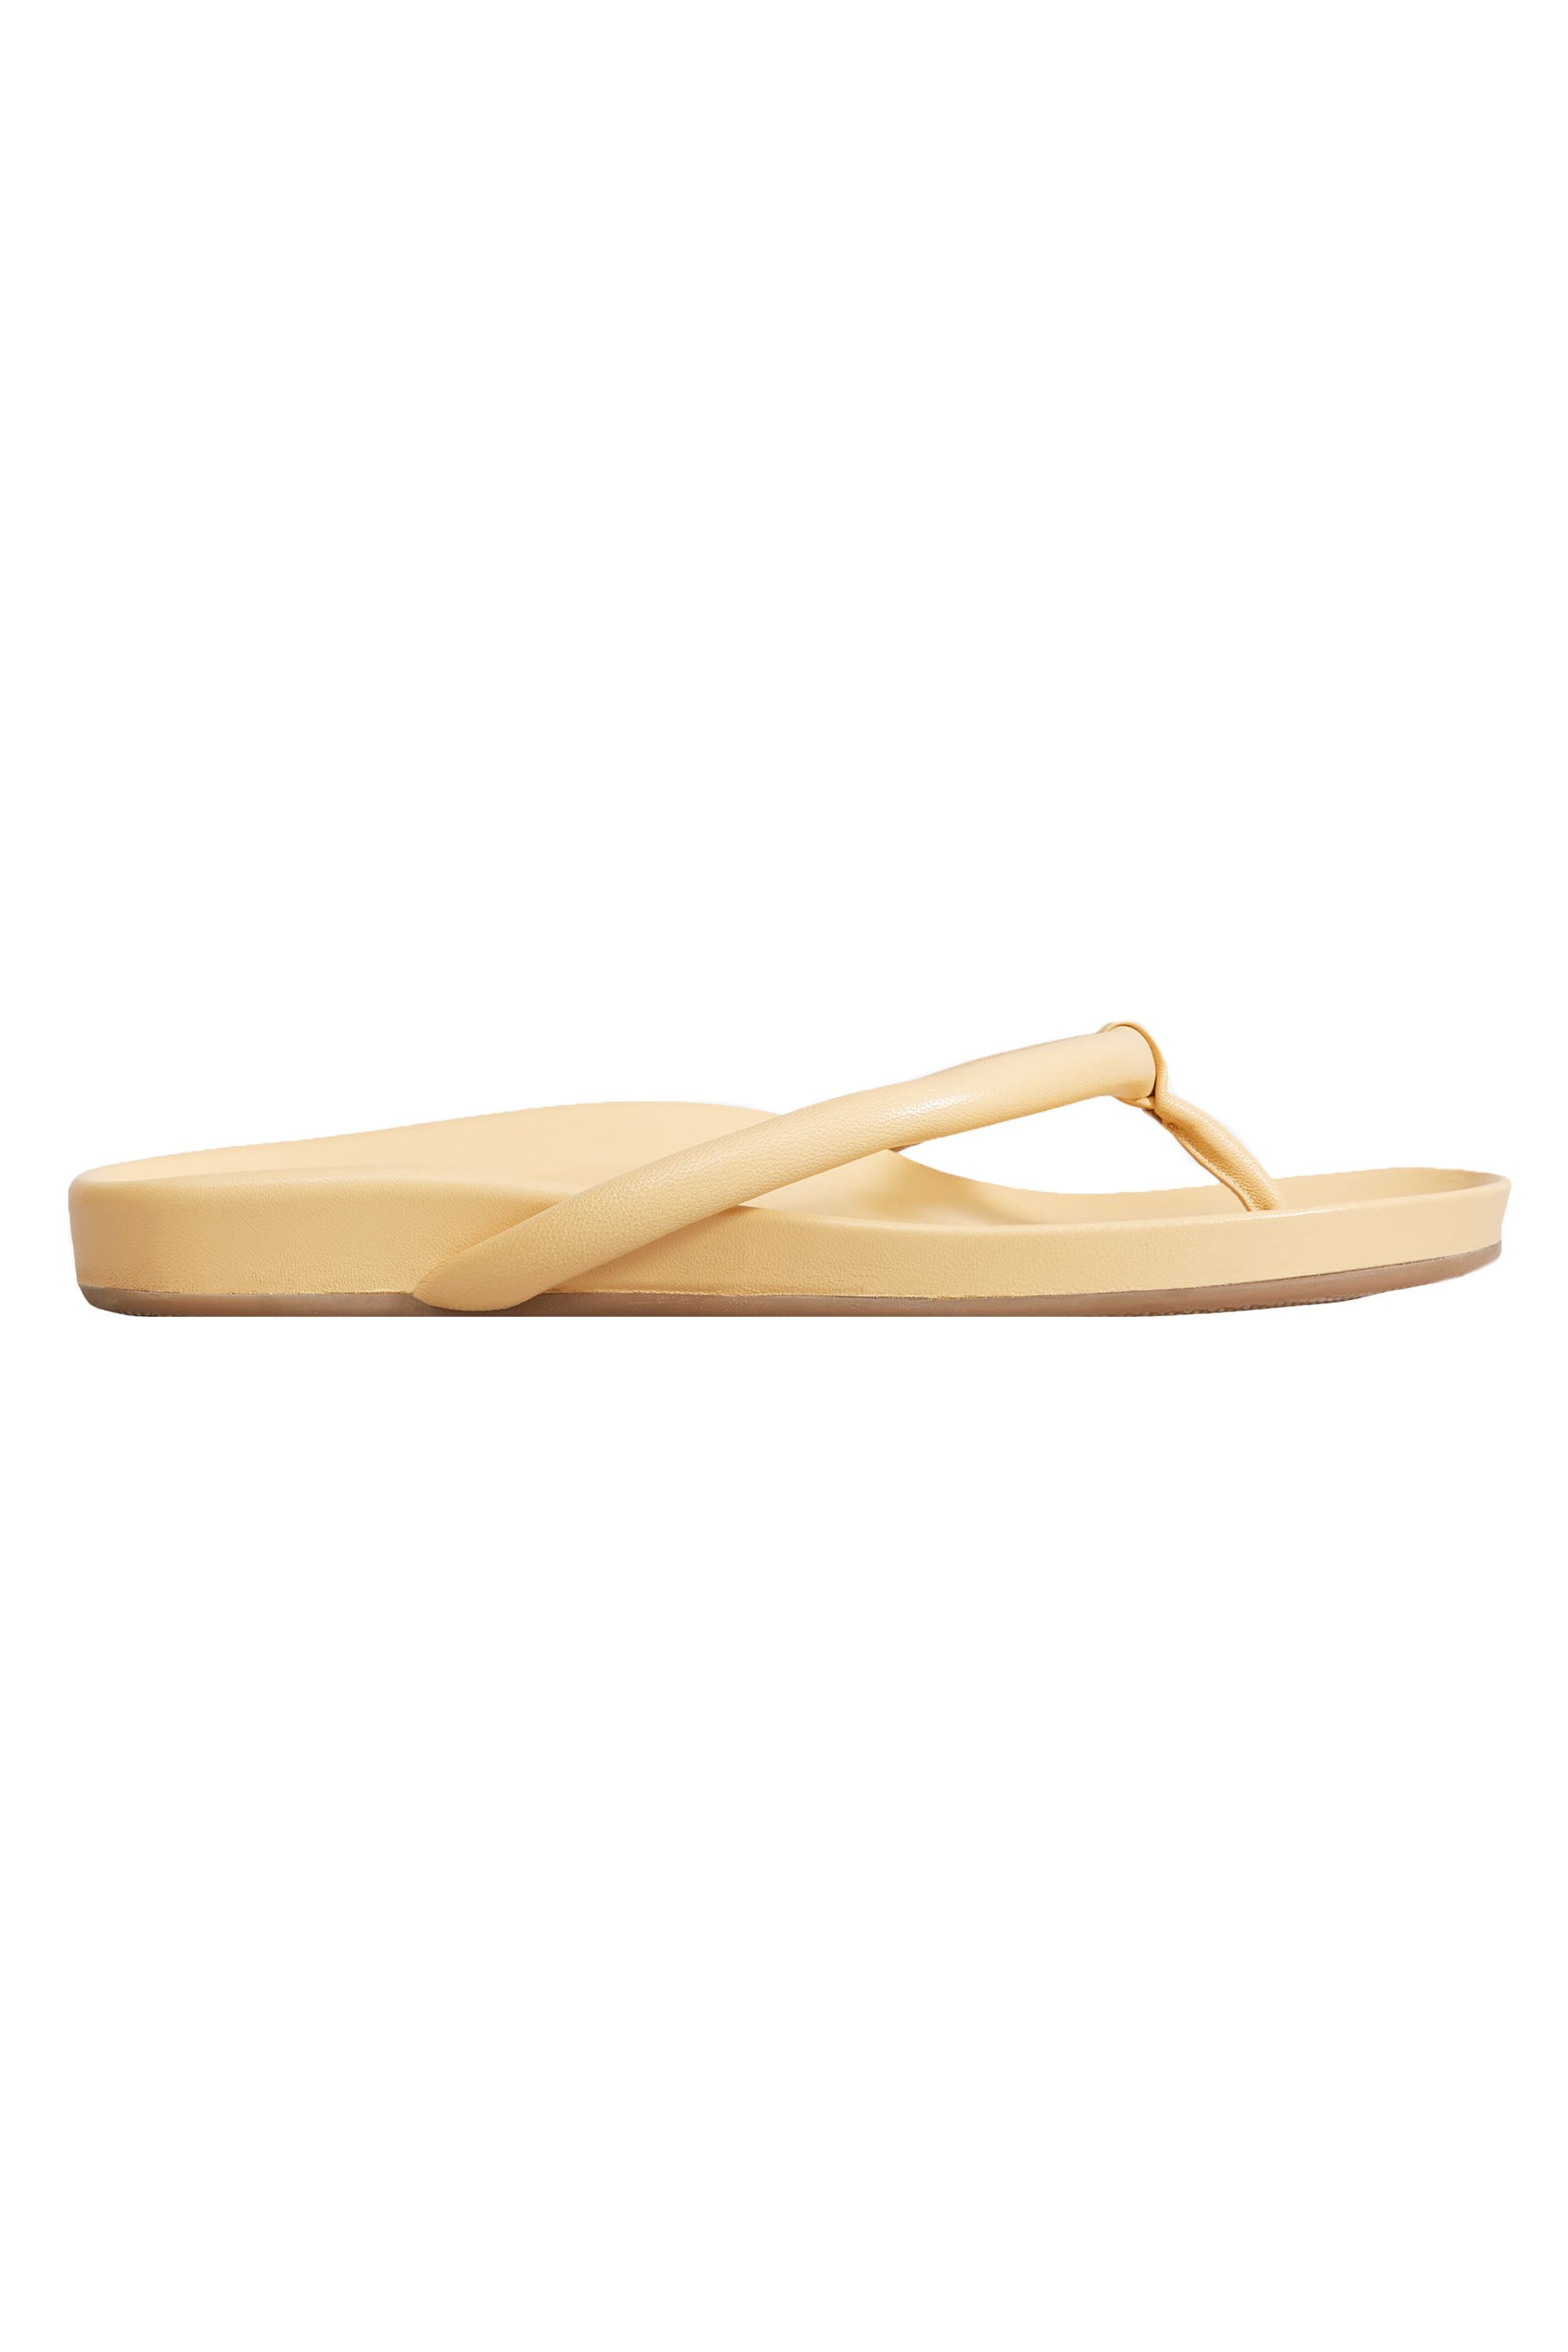 The Form Thong Sandal